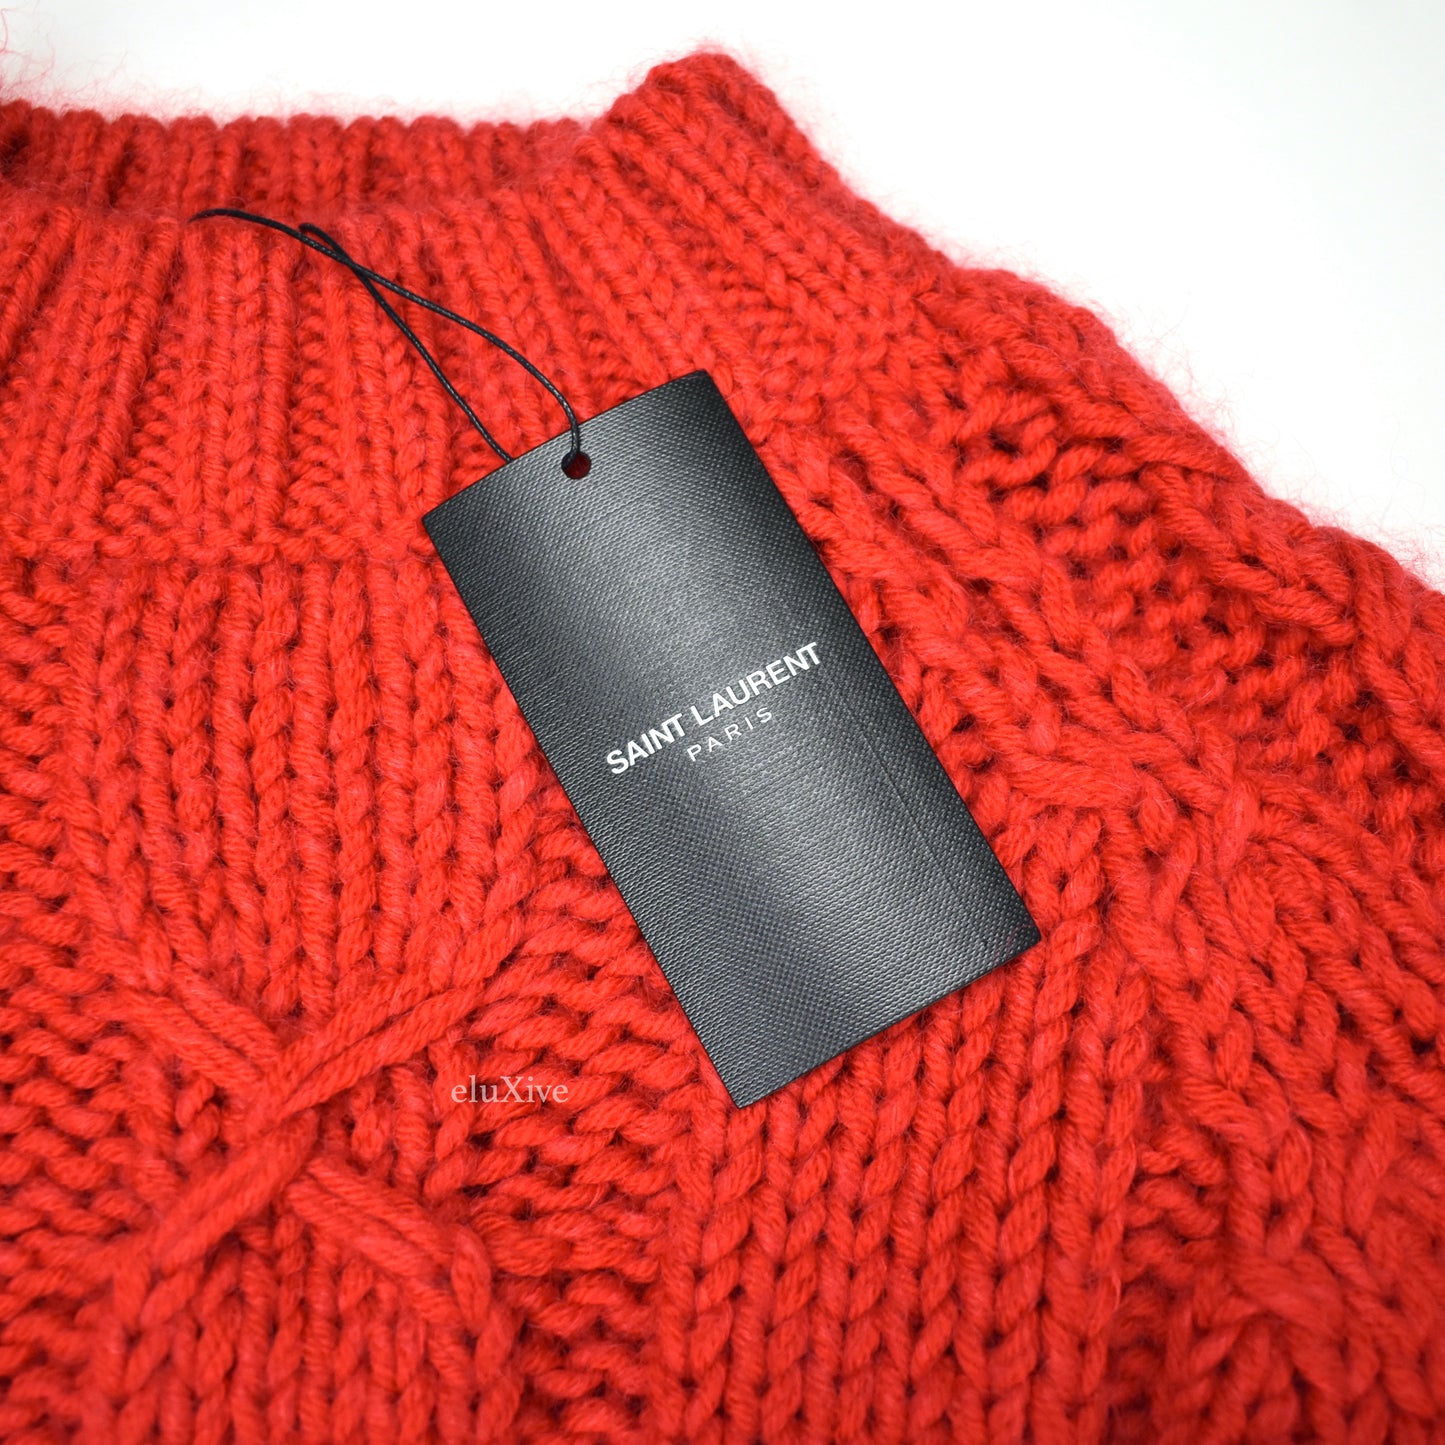 Saint Laurent - Red Heavy Cable Knit Wool Sweater